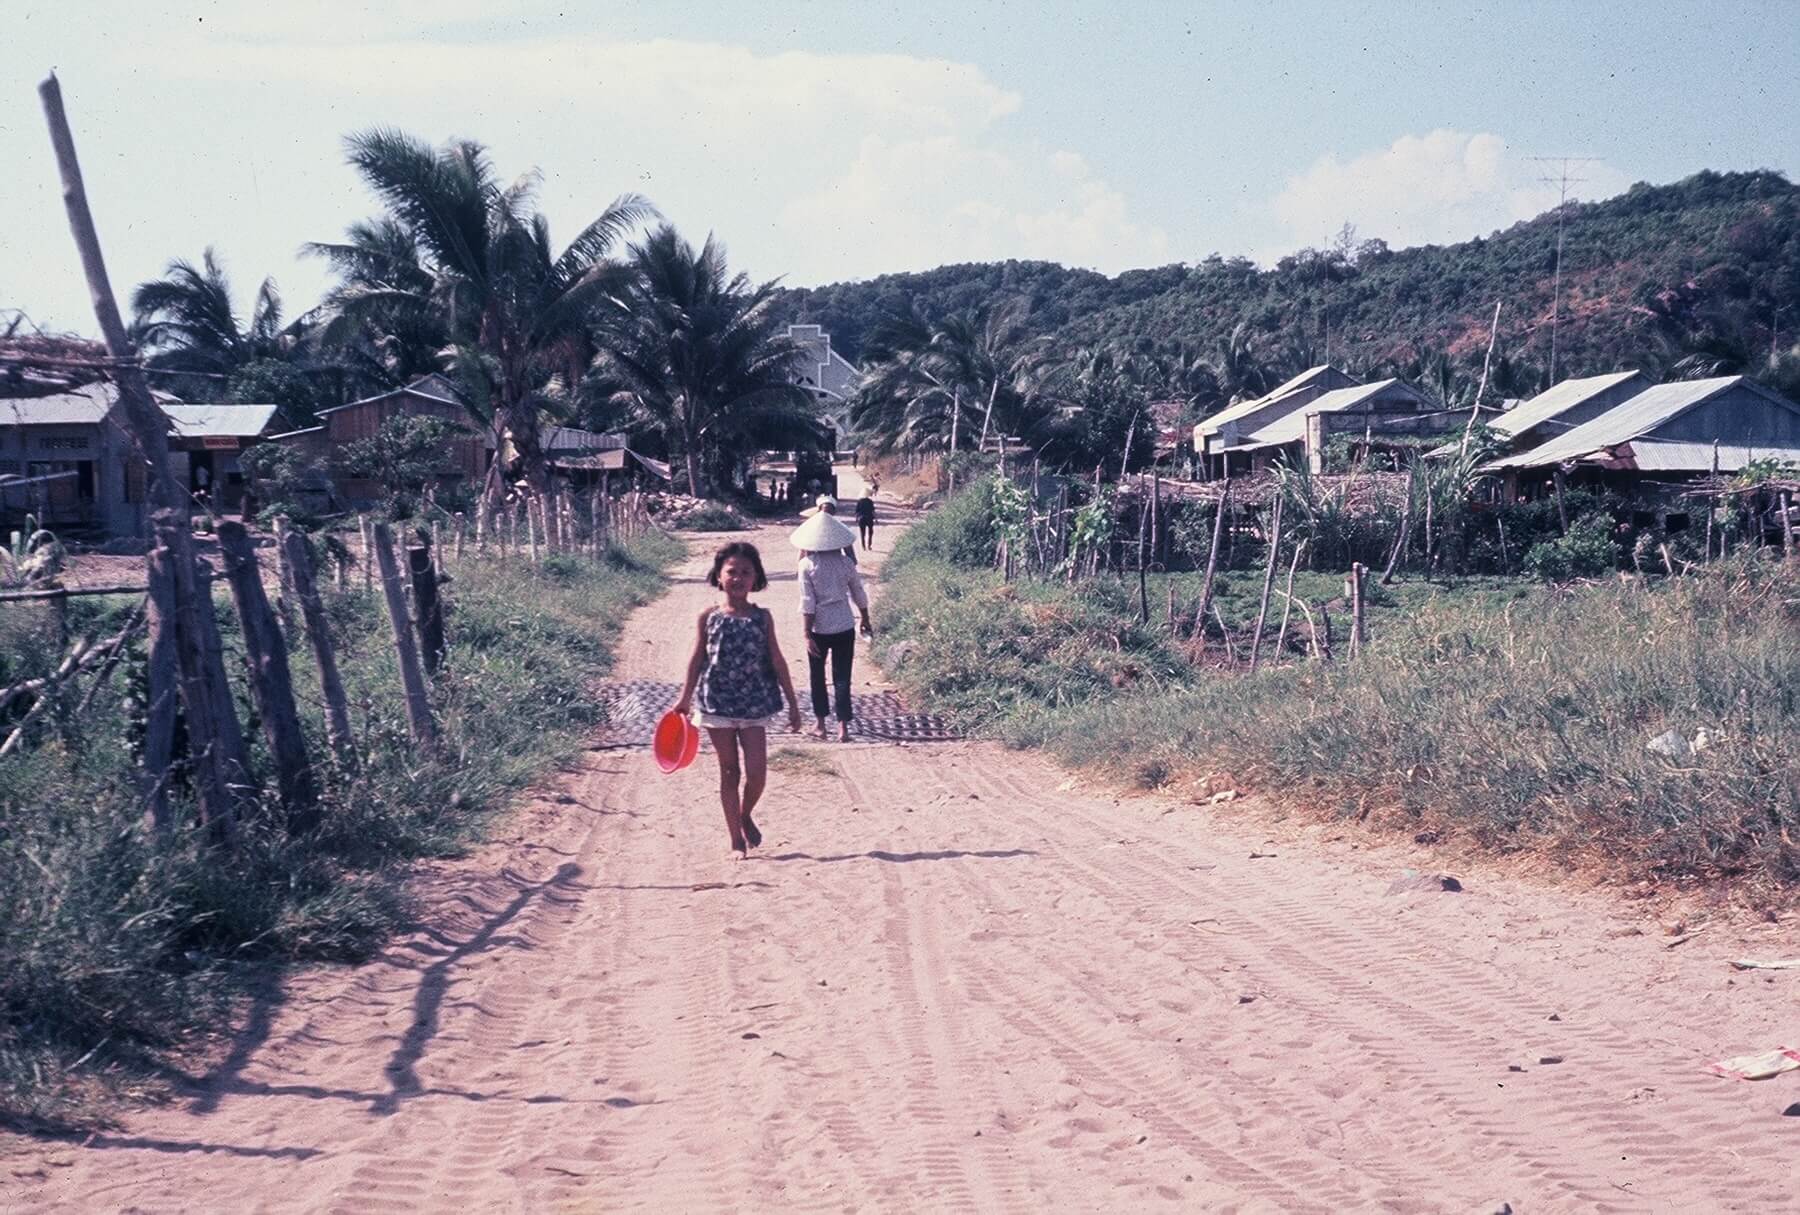 Vietnamese civilians in a village, young girl walking towards the camera.